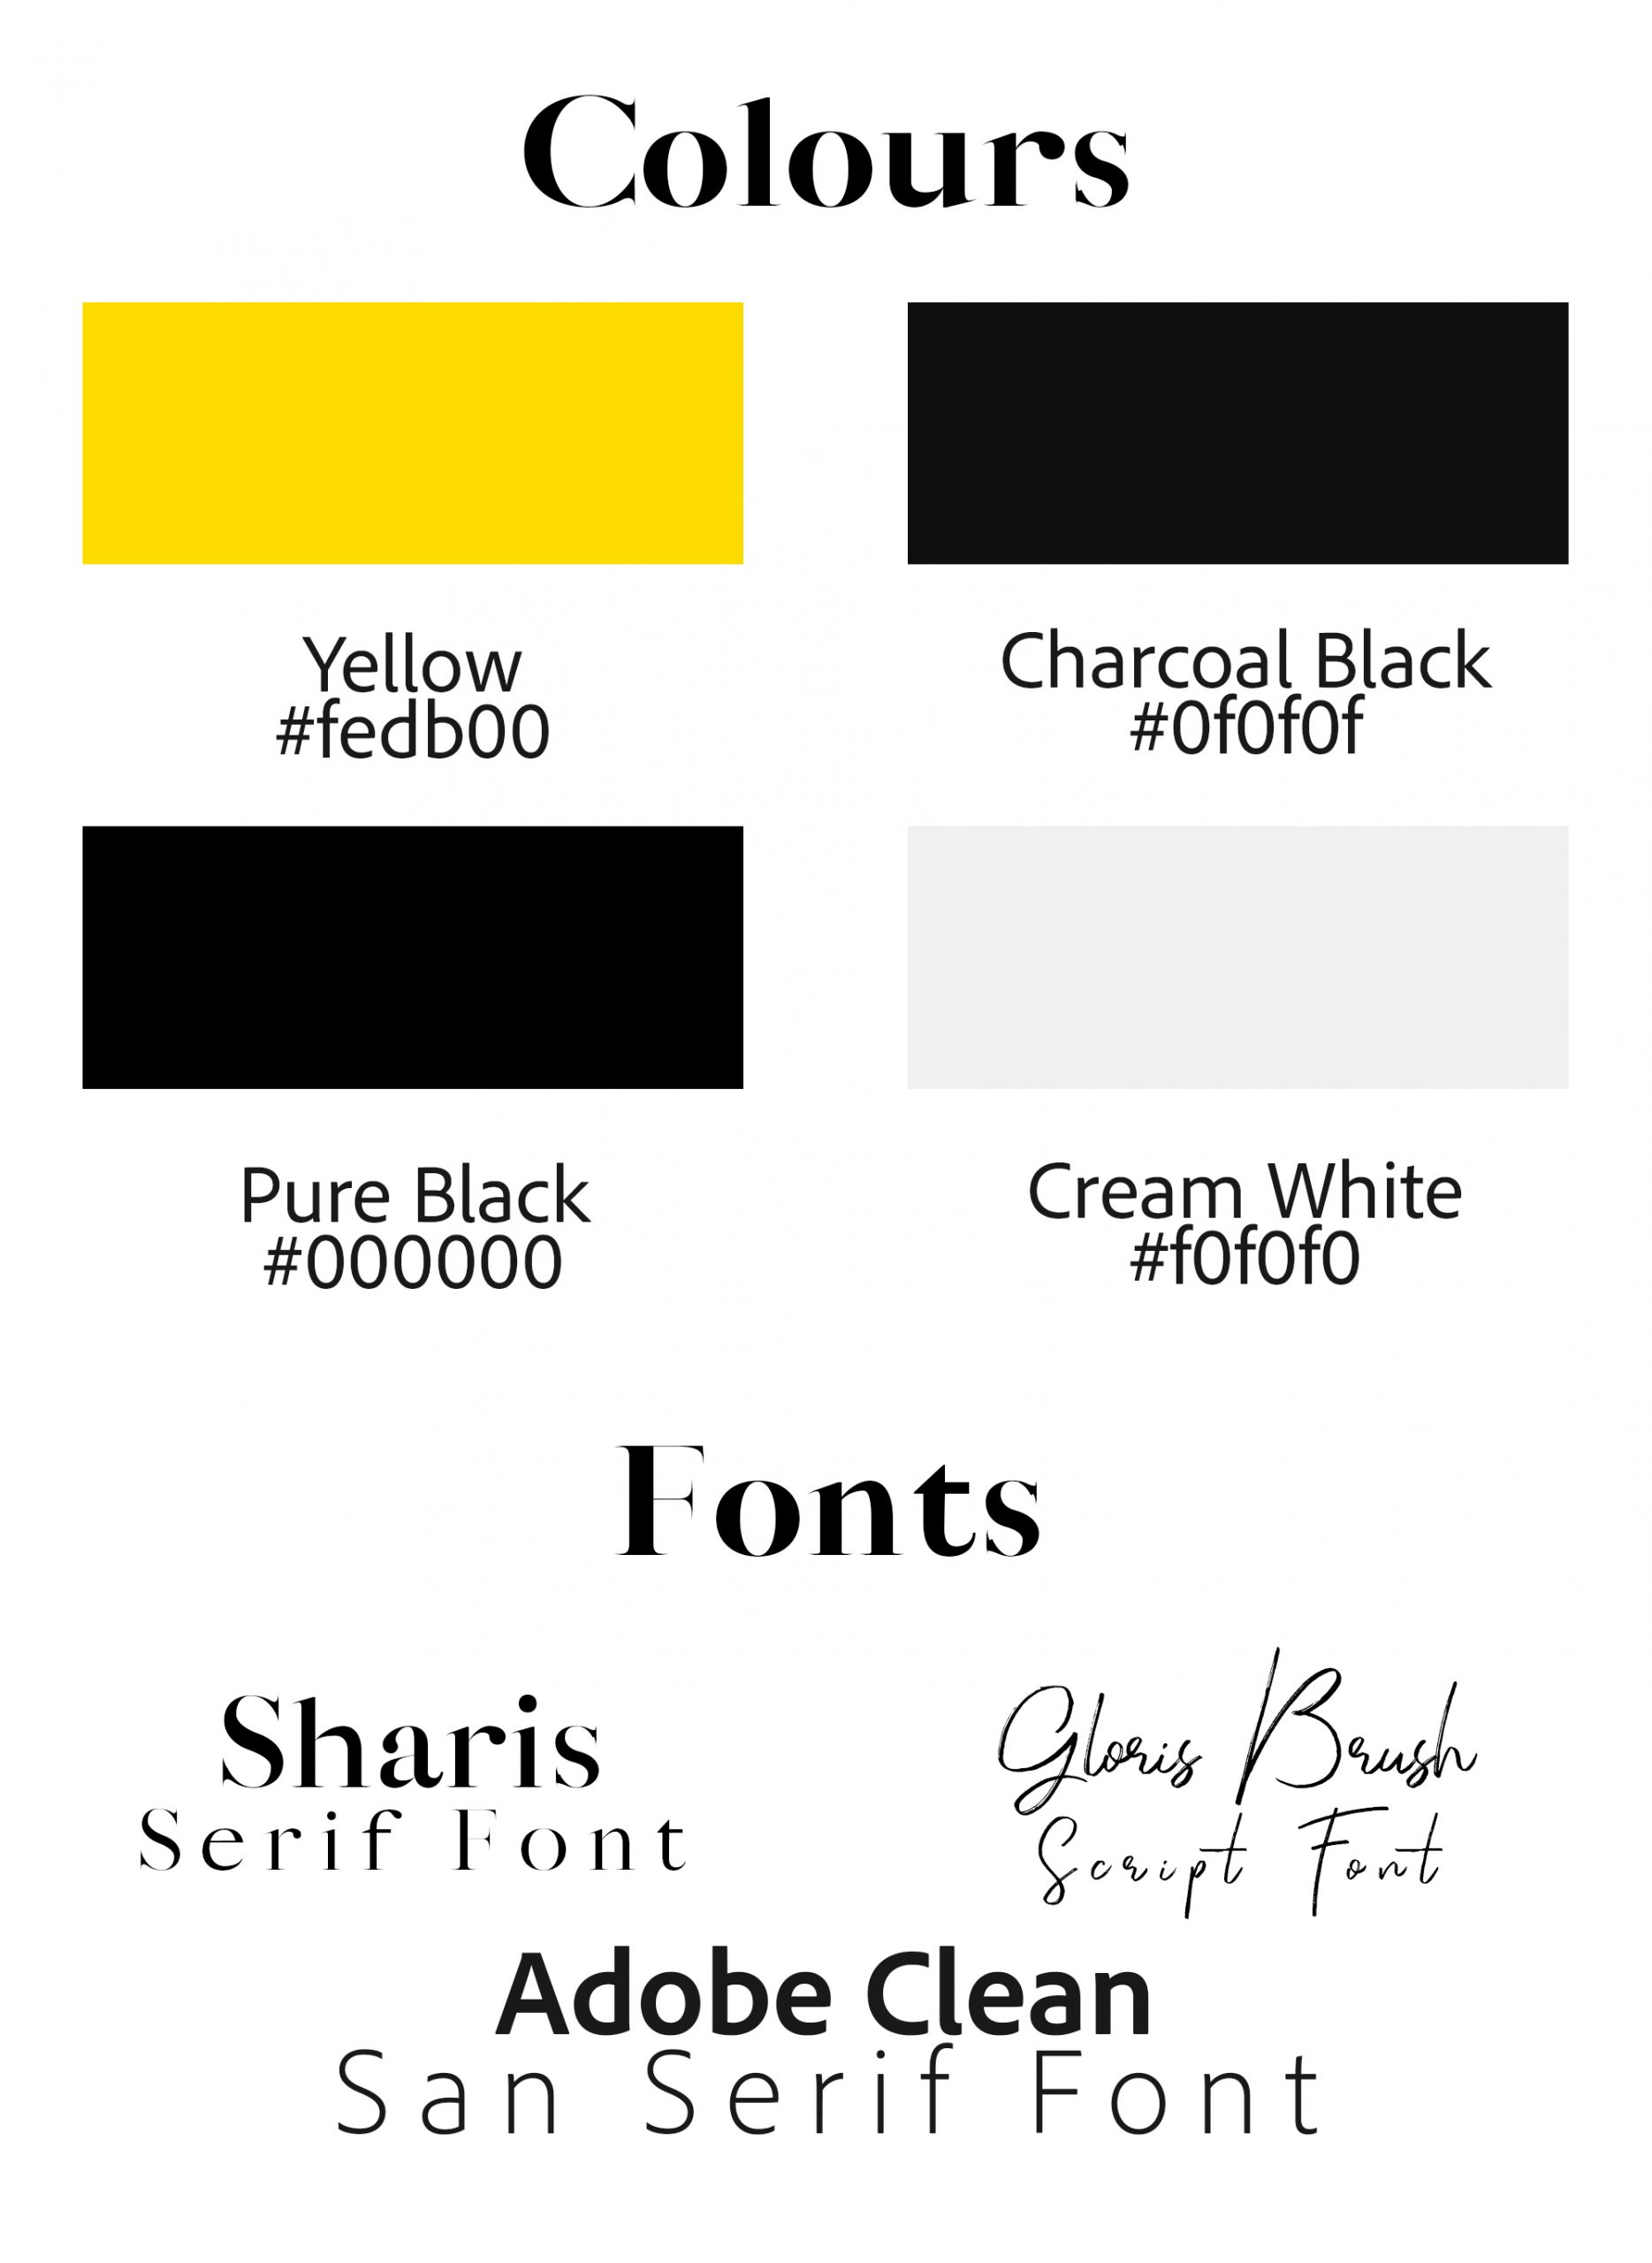 Colour Palette and Graphic Design template for Jozi's Kitchennnnnnnnnnnnnnnnnnnnnnnnnnnnnnn